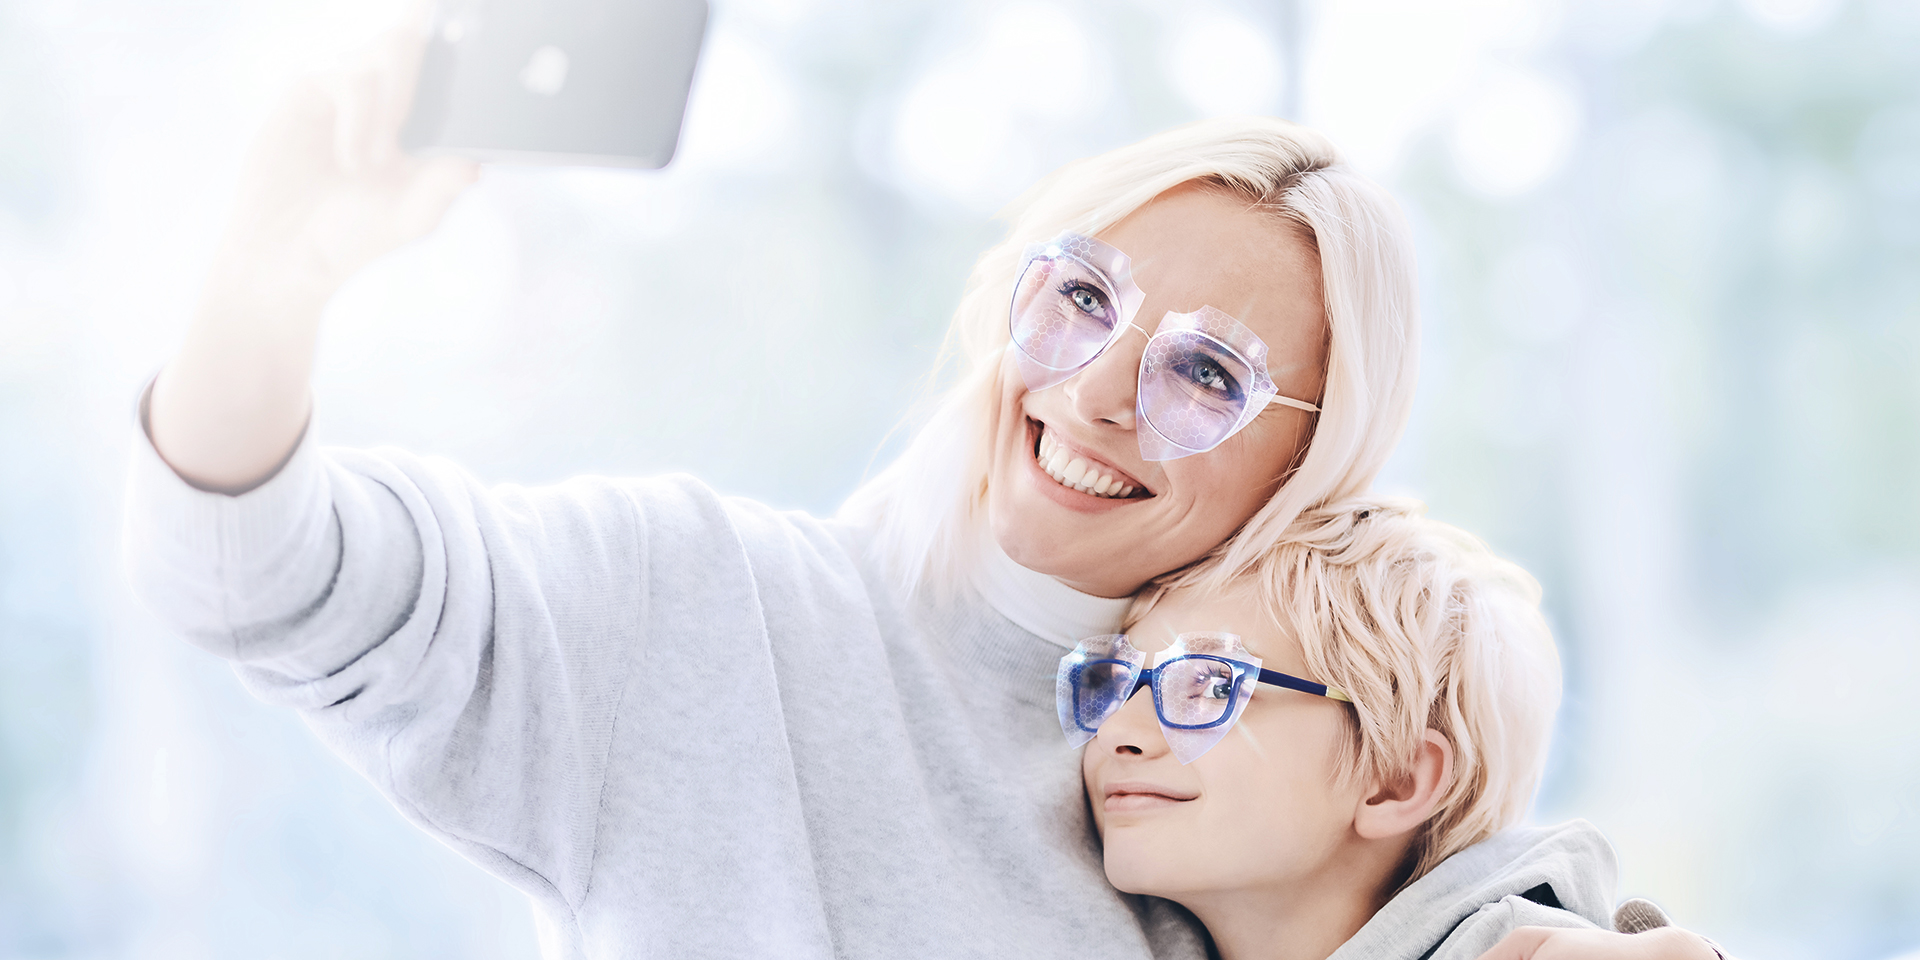 Blonde woman taking a selfie with her boy. Both wear glasses with AntiVirus coating.